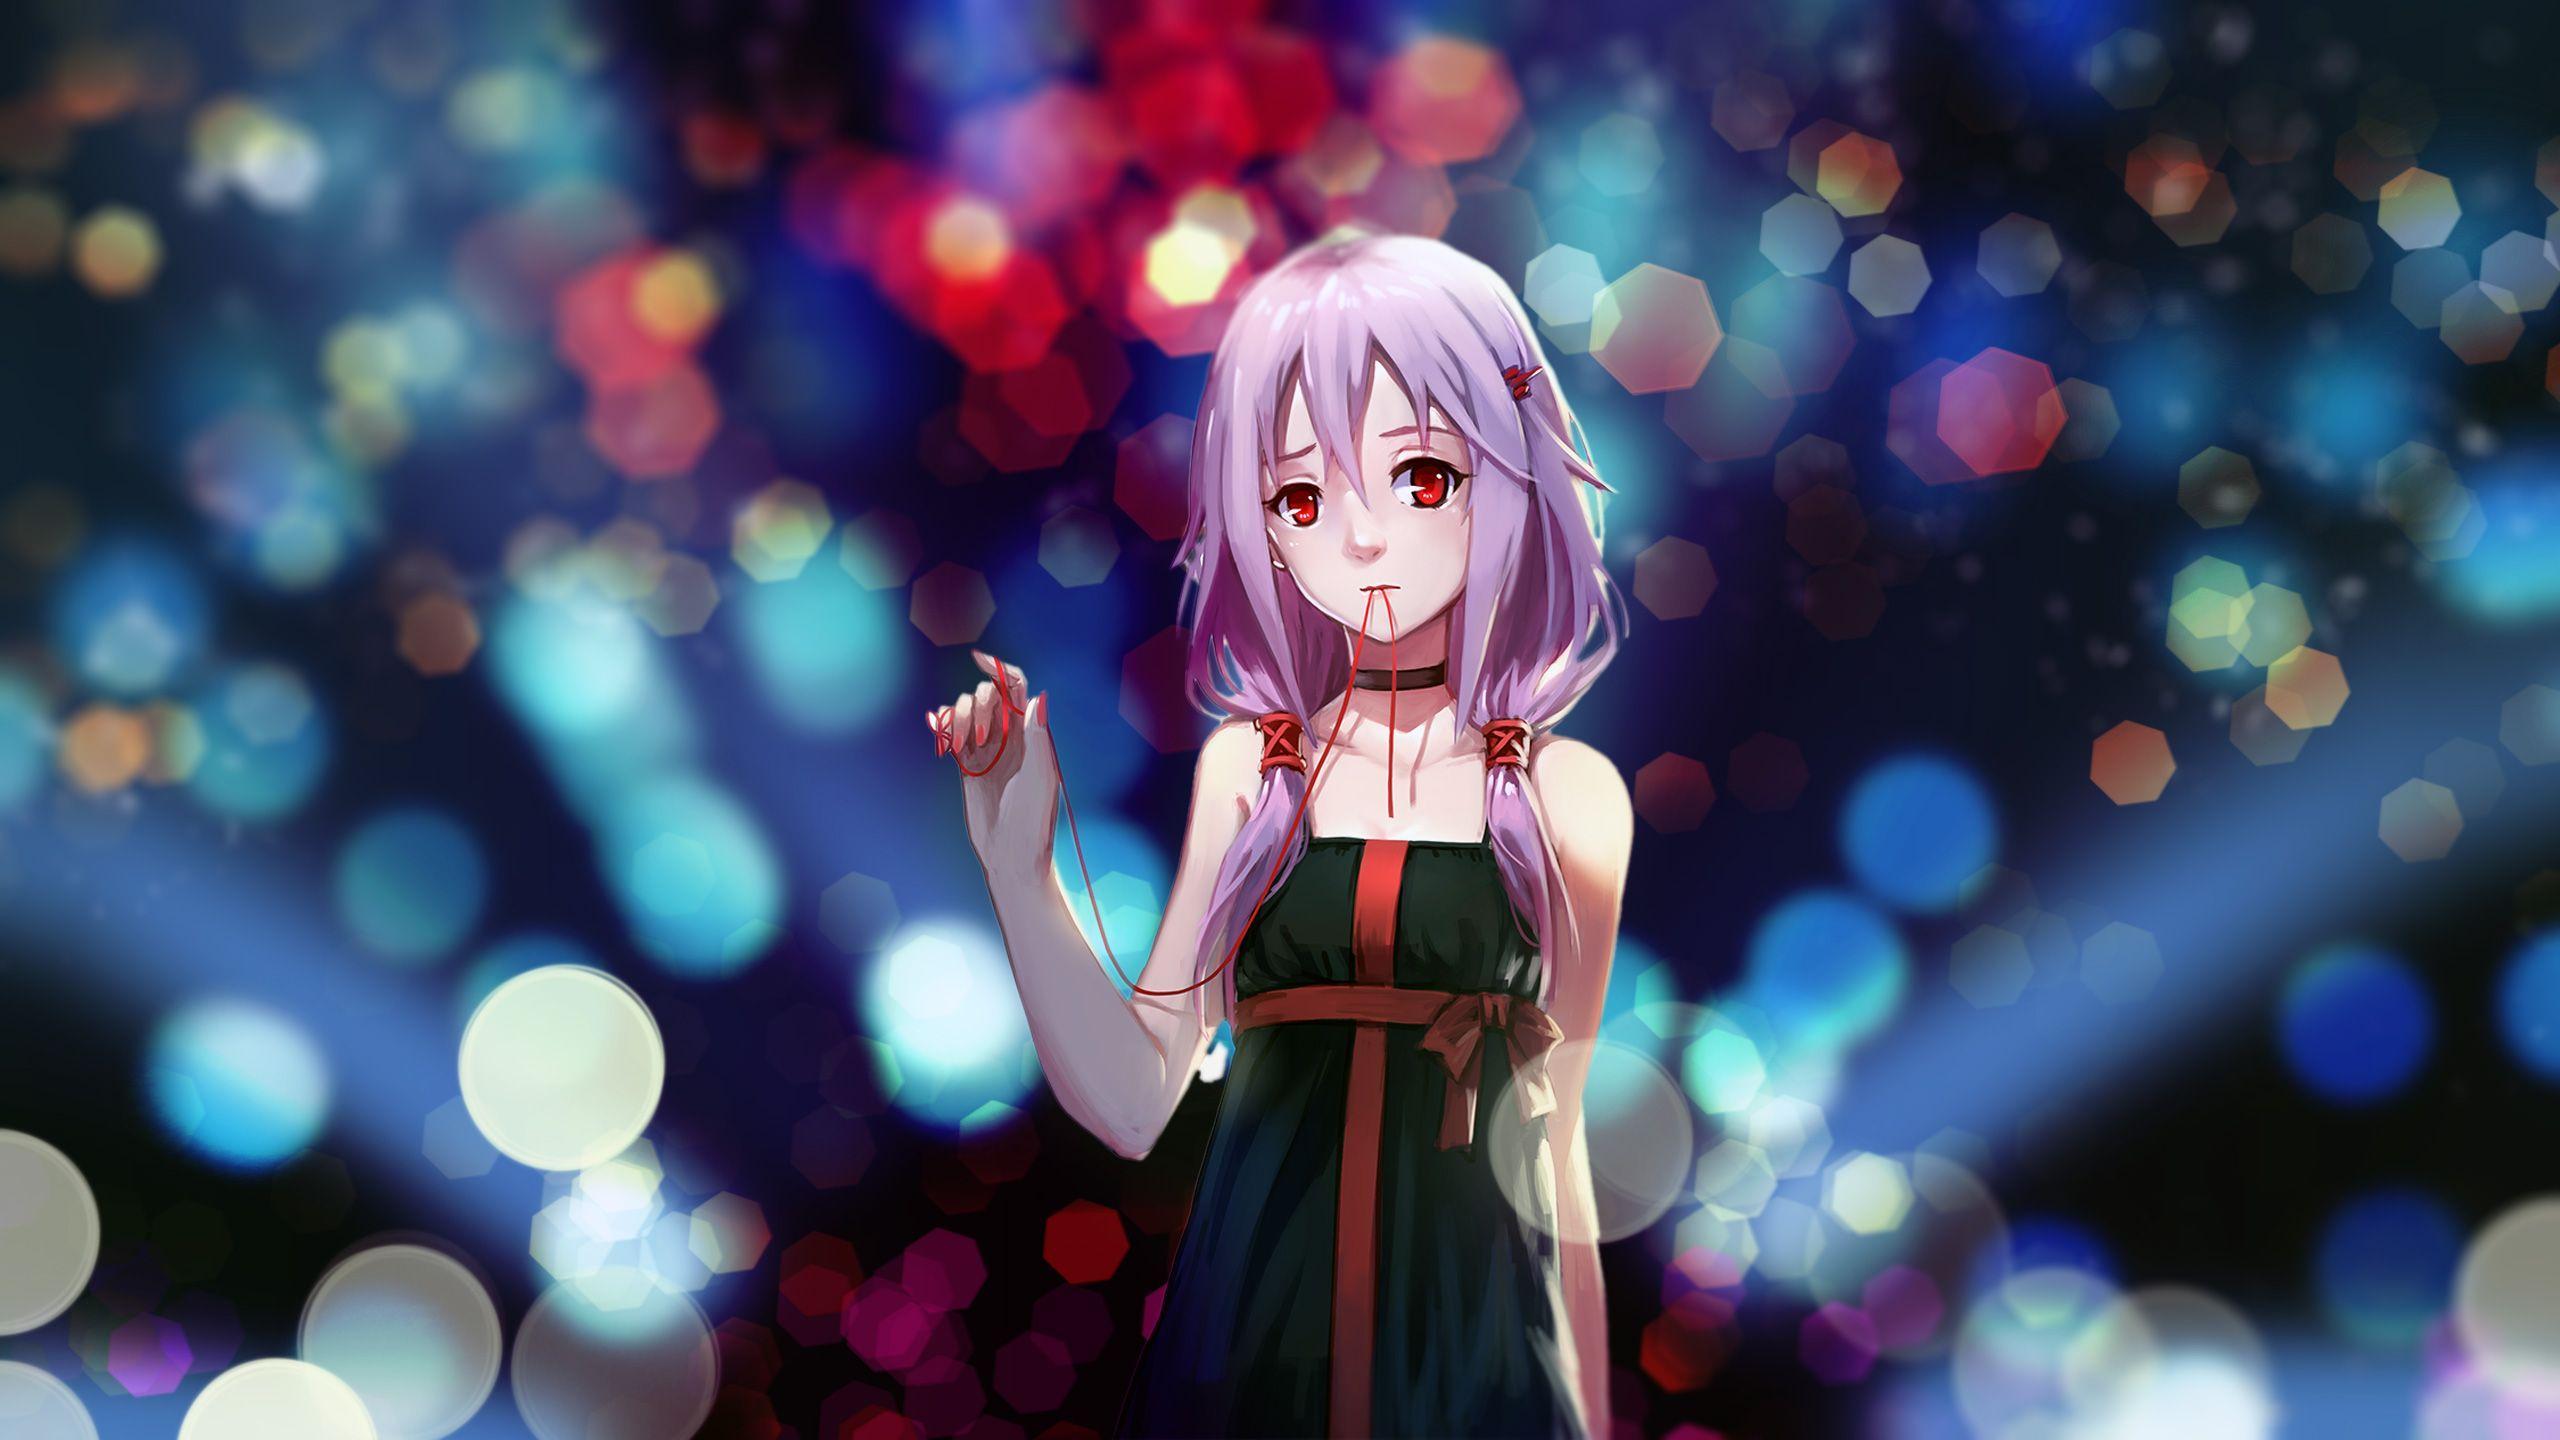 2560 x 1440 · jpeg - Anime Girl Alone Room Wallpapers - Wallpaper Cave